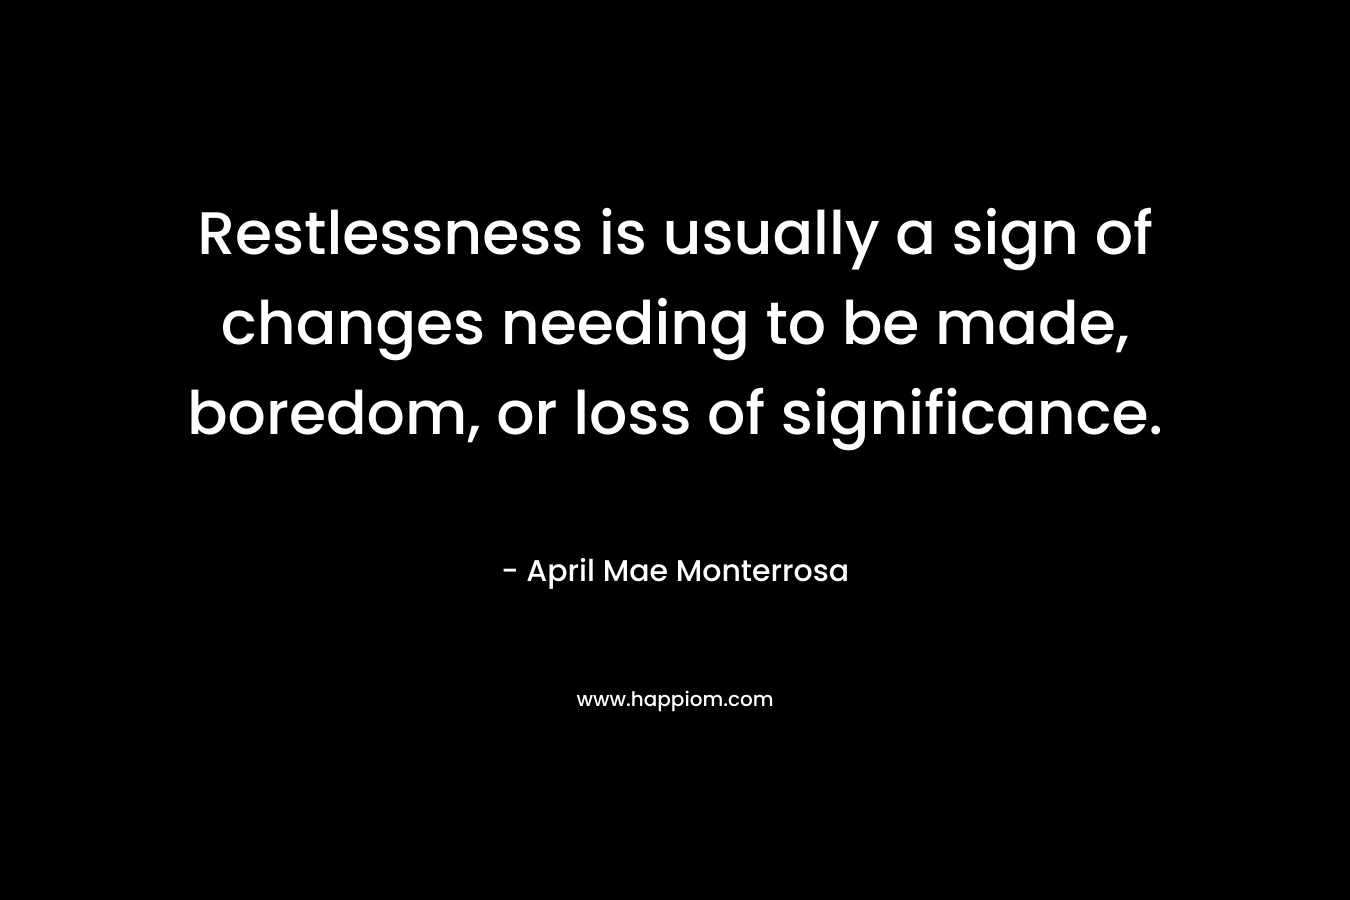 Restlessness is usually a sign of changes needing to be made, boredom, or loss of significance.